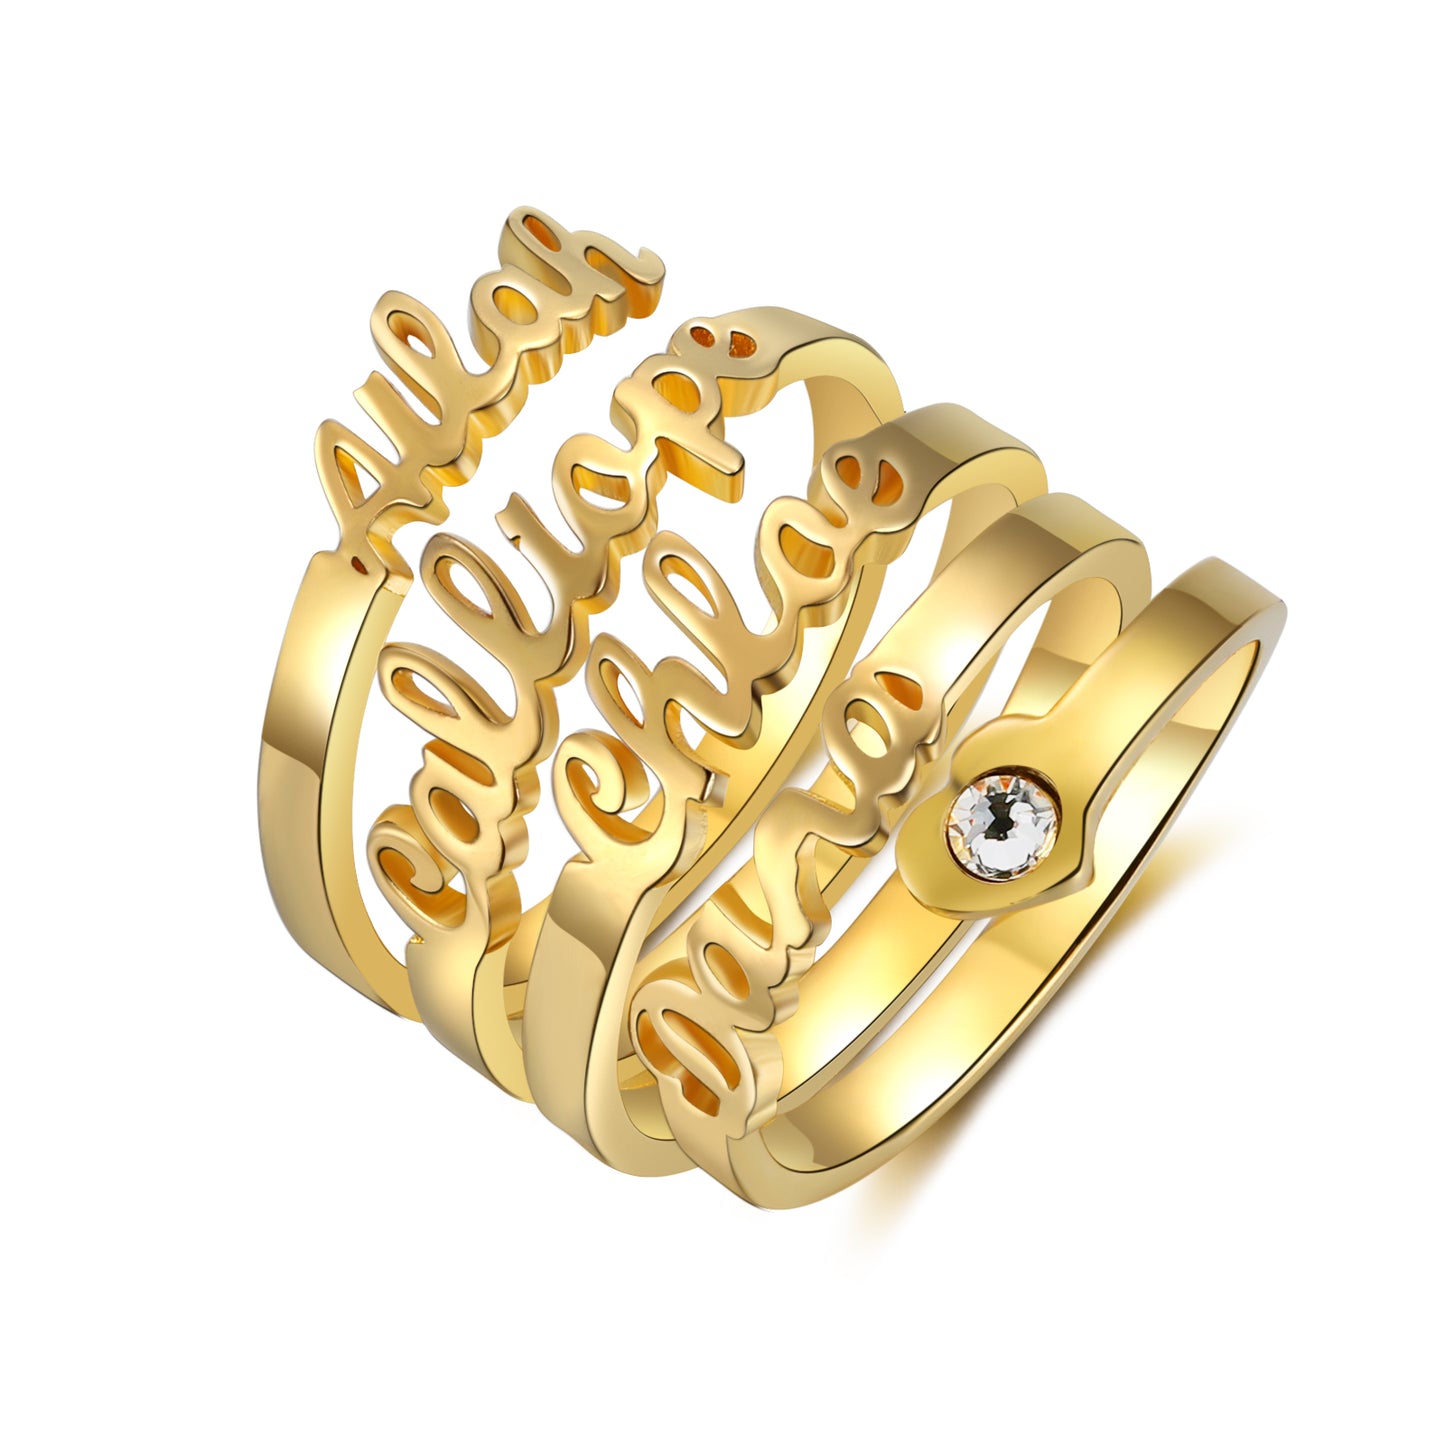 Wholesale Jewelry Personalized Name Opening Ring